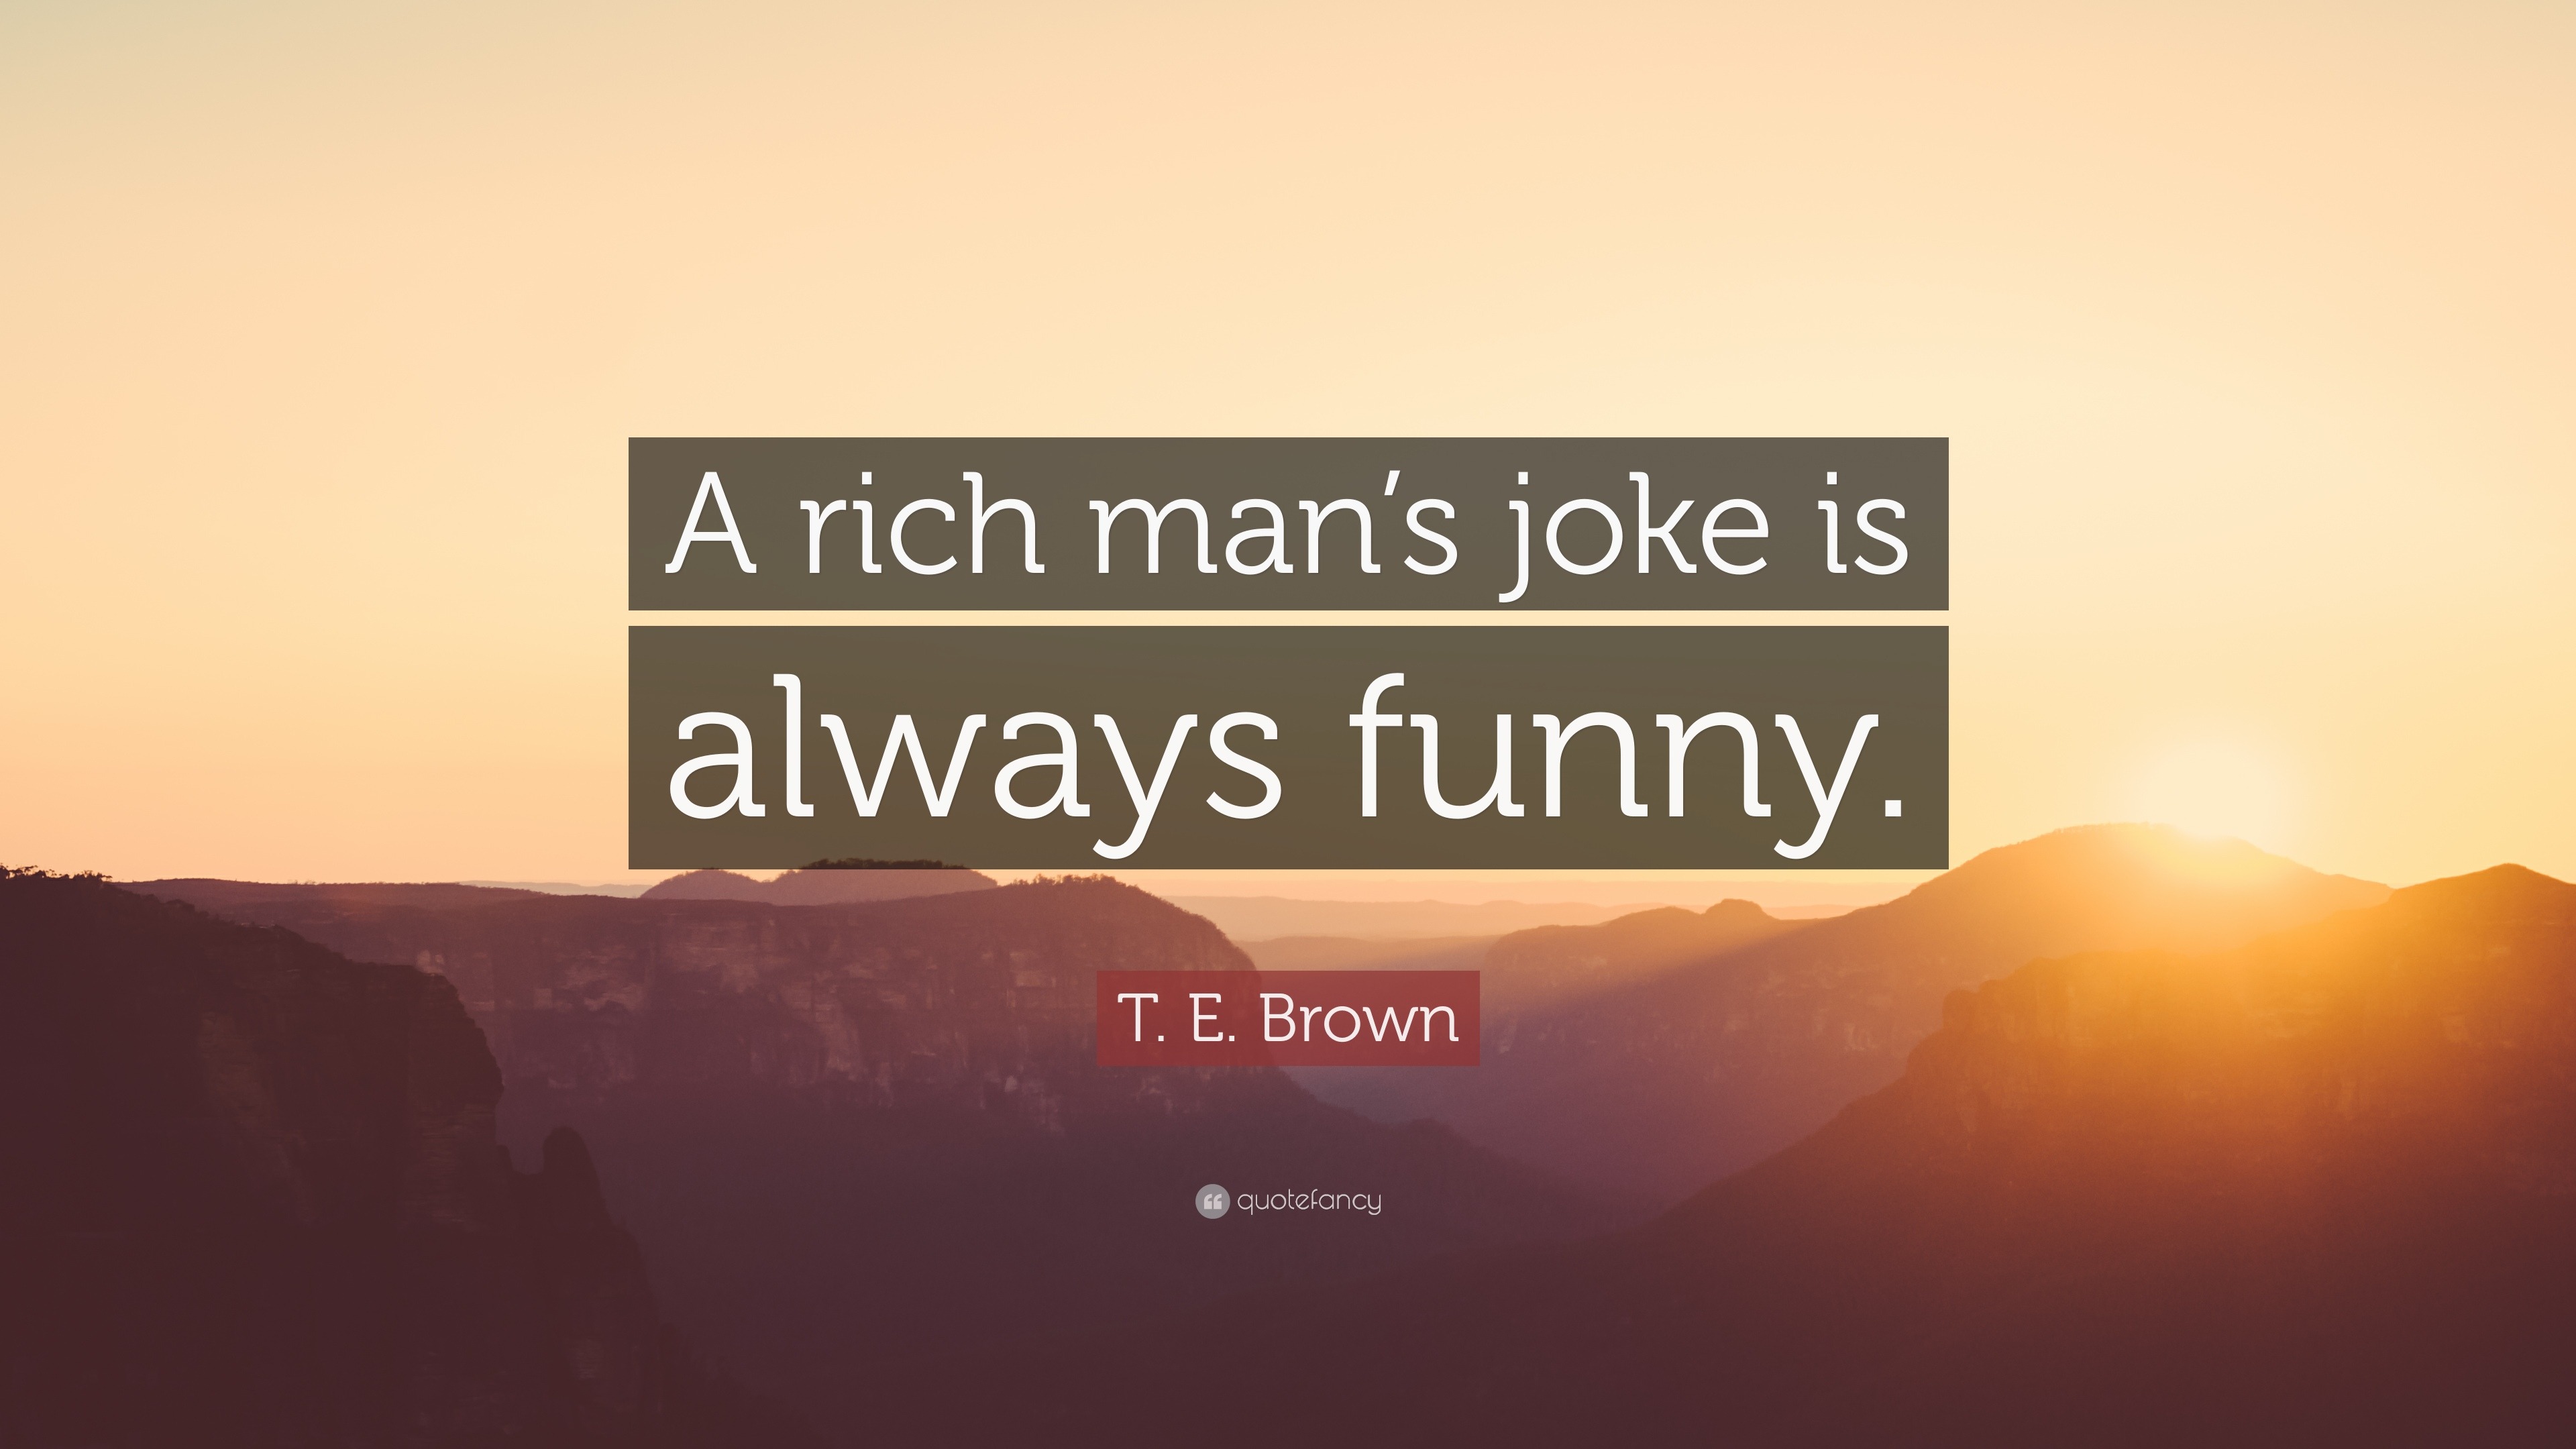 T. E. Brown Quote: “A rich man's joke is always funny.”